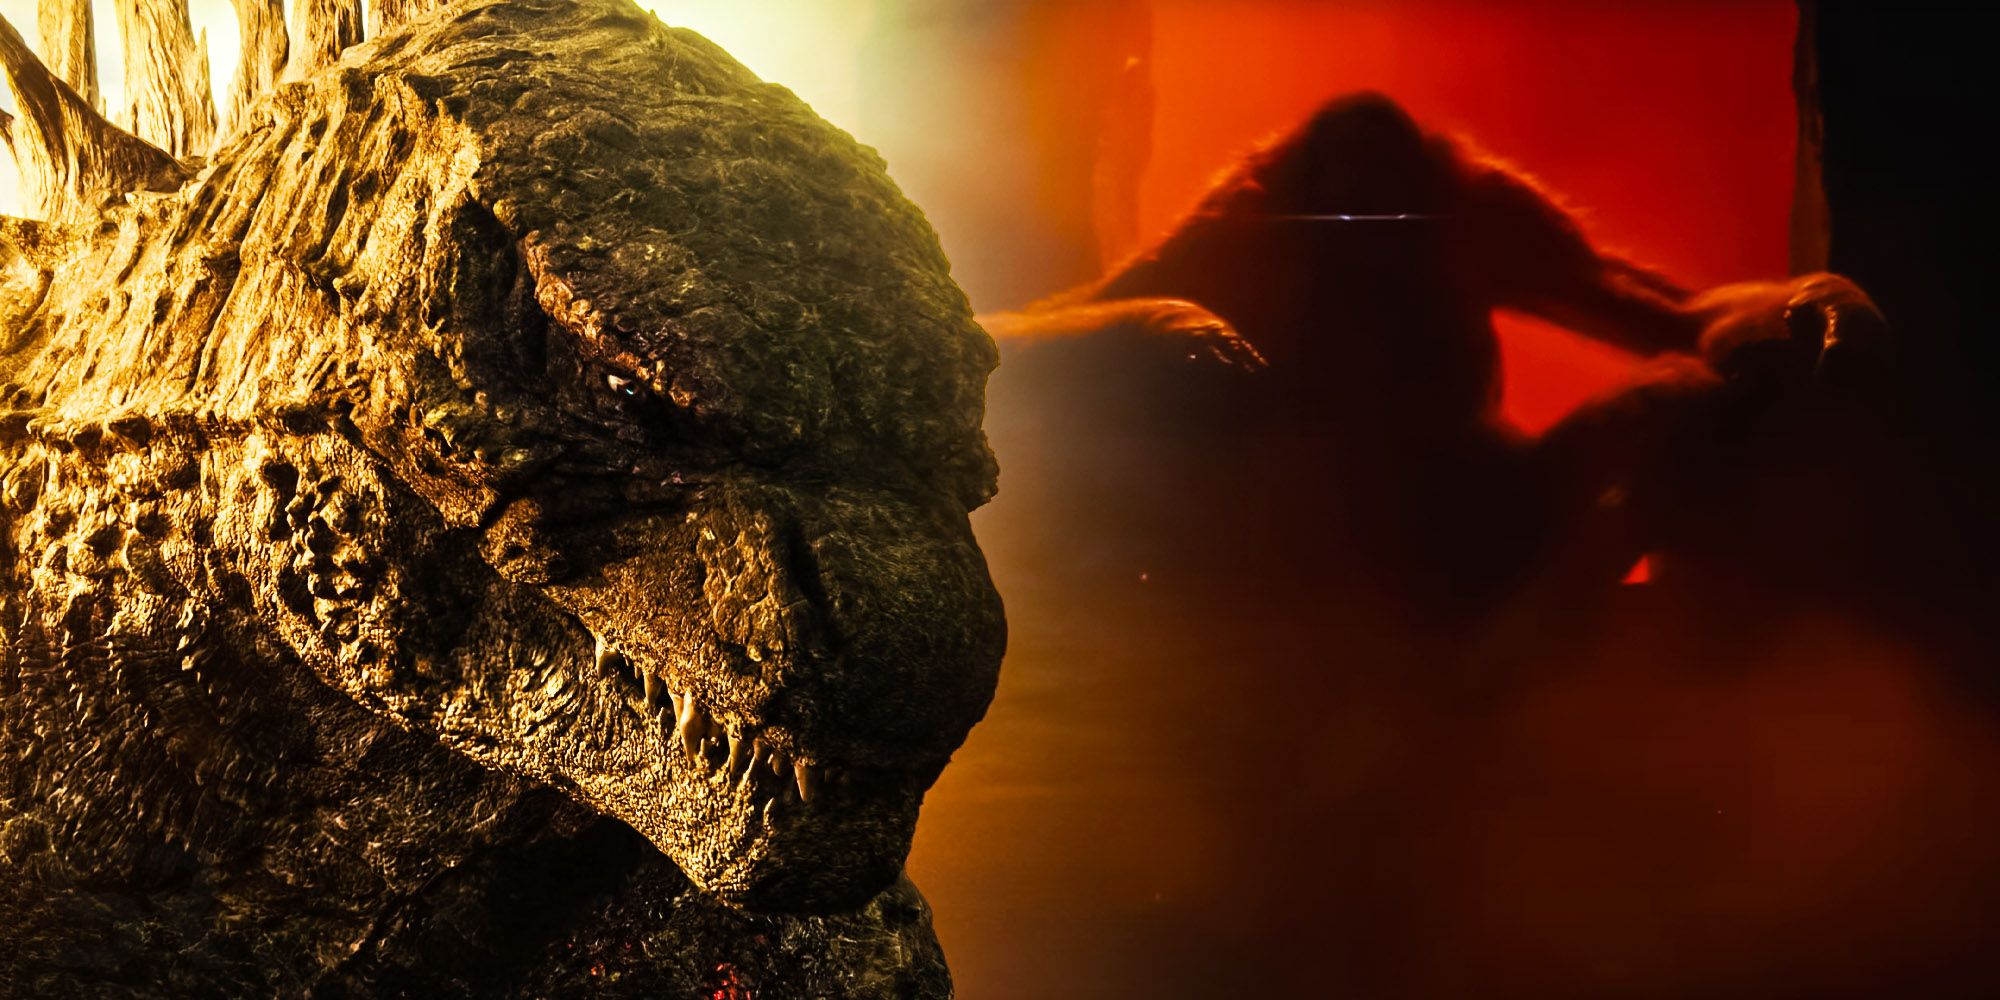 Explaining The X And New Empire In Godzilla Vs Kong 2's Title